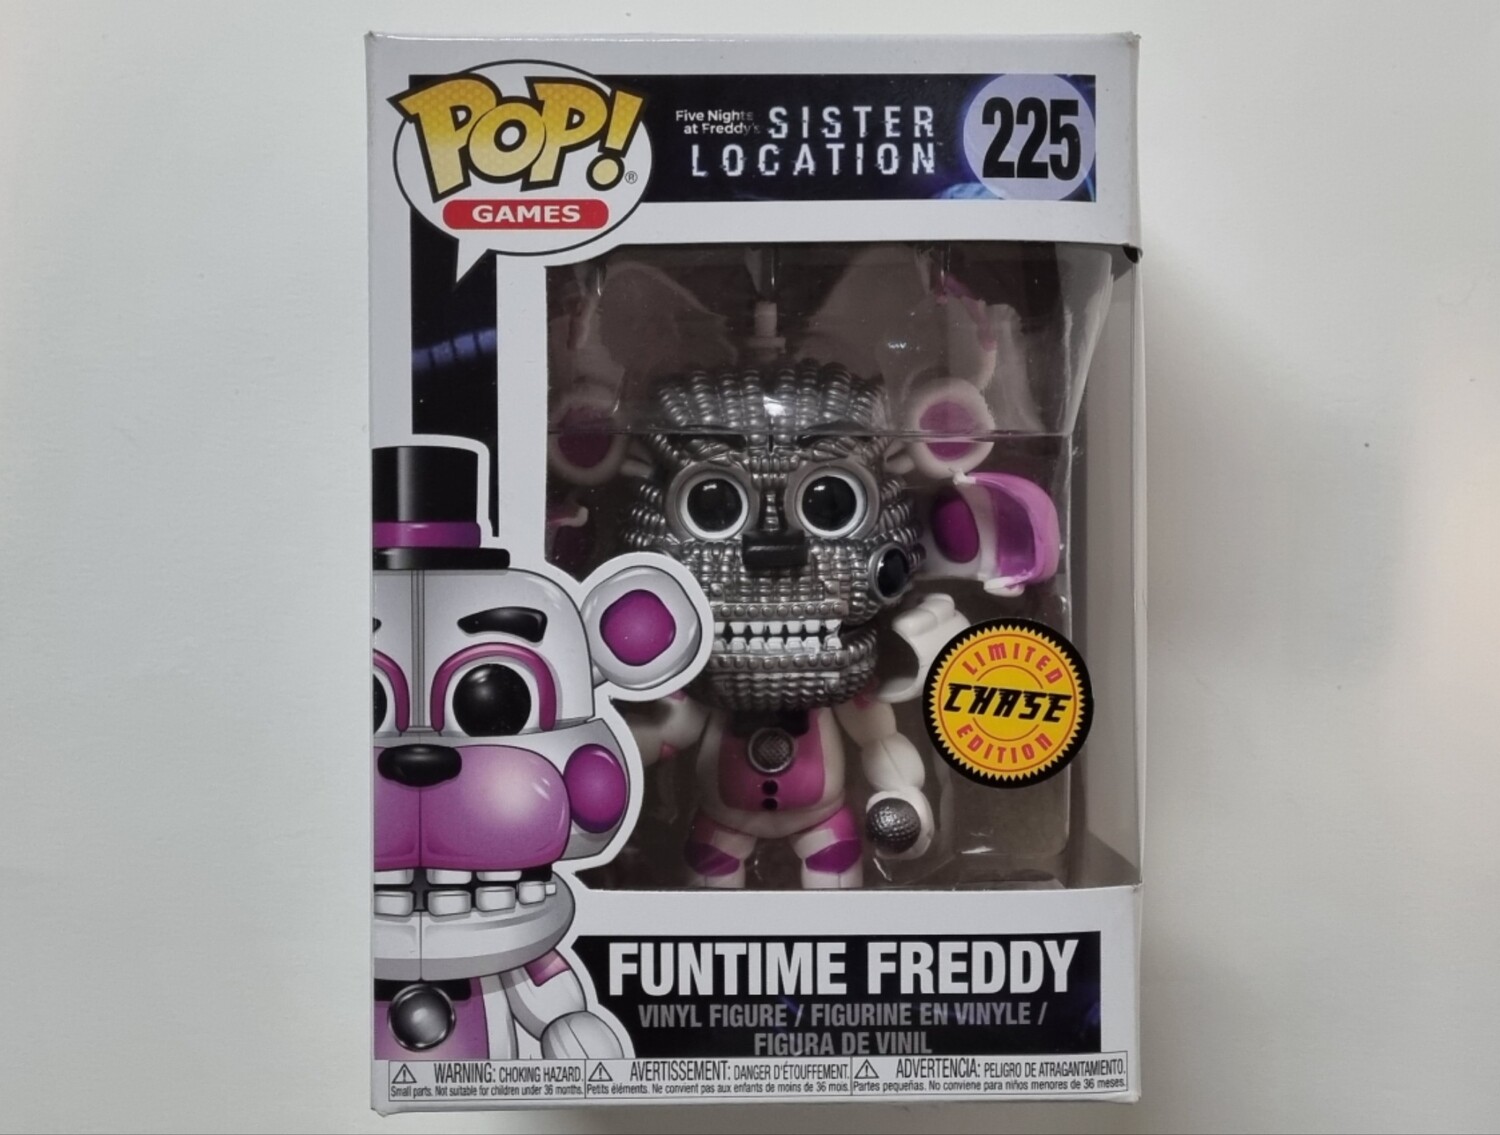 Funko Pop!, Funtime Freddy, Chase Limited Edition, #225, Games, Five Nights at Freddy's Sister Location (FNAF)